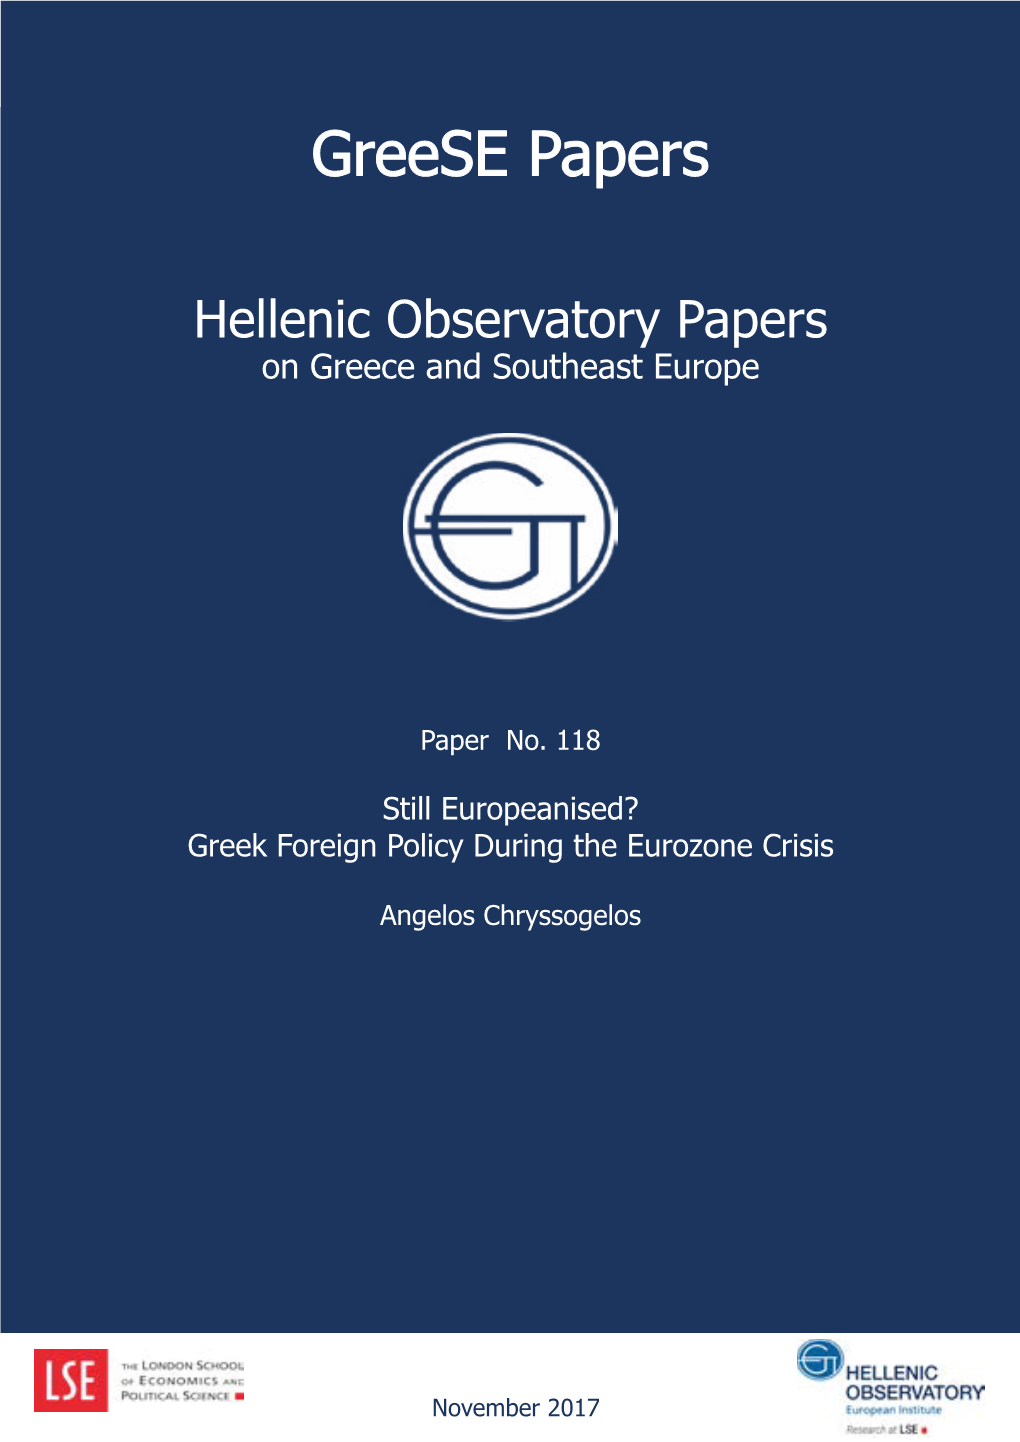 Greek Foreign Policy During the Eurozone Crisis